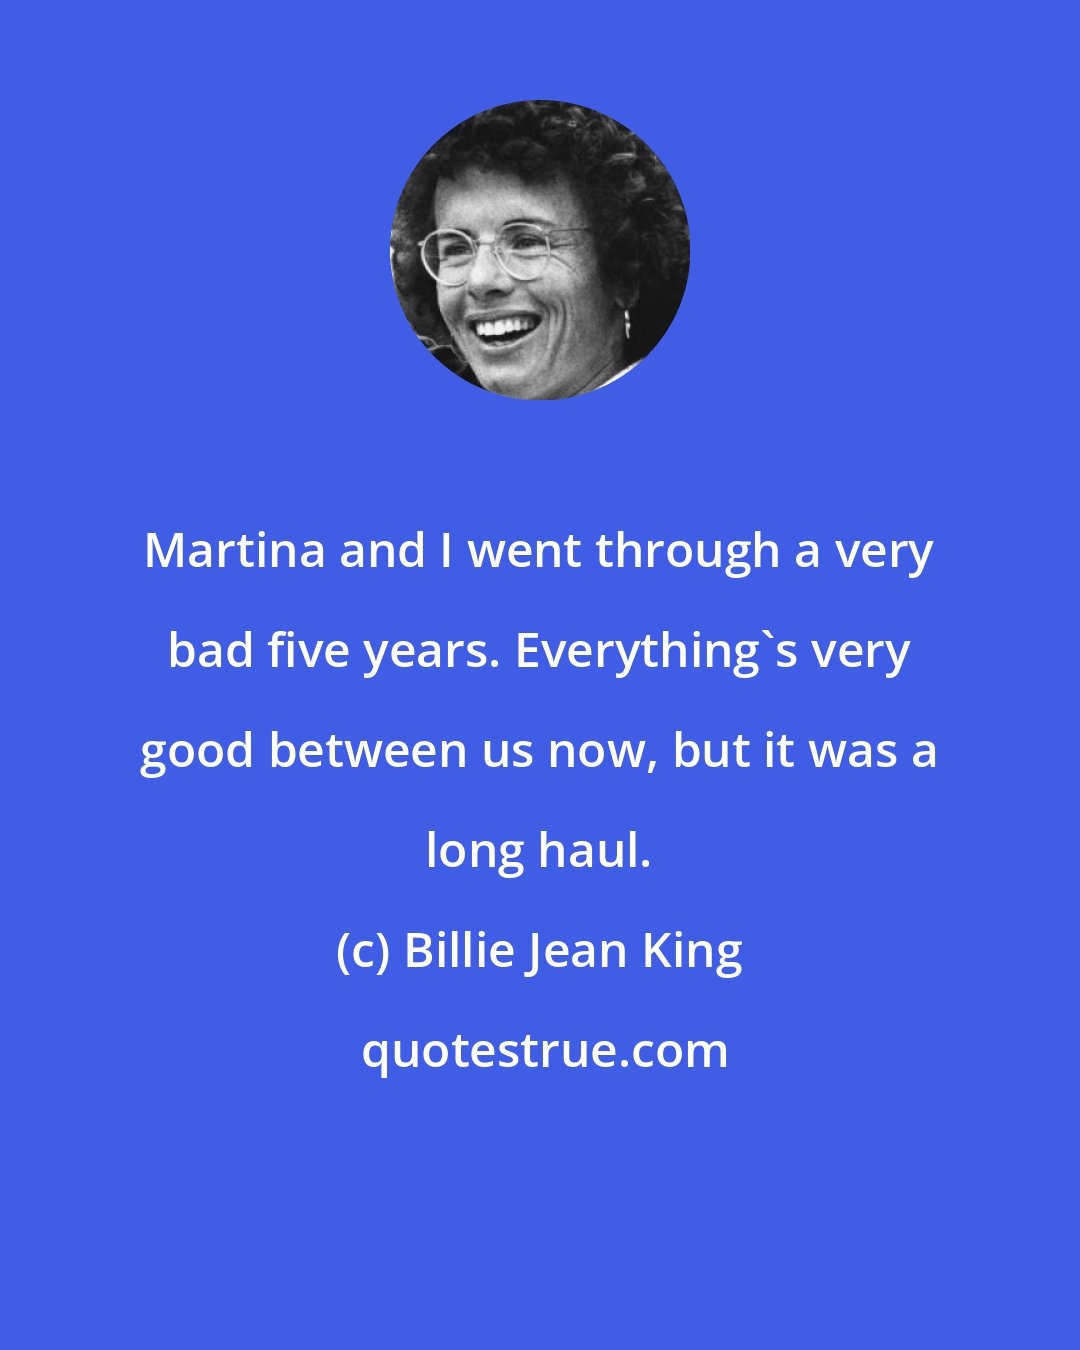 Billie Jean King: Martina and I went through a very bad five years. Everything's very good between us now, but it was a long haul.